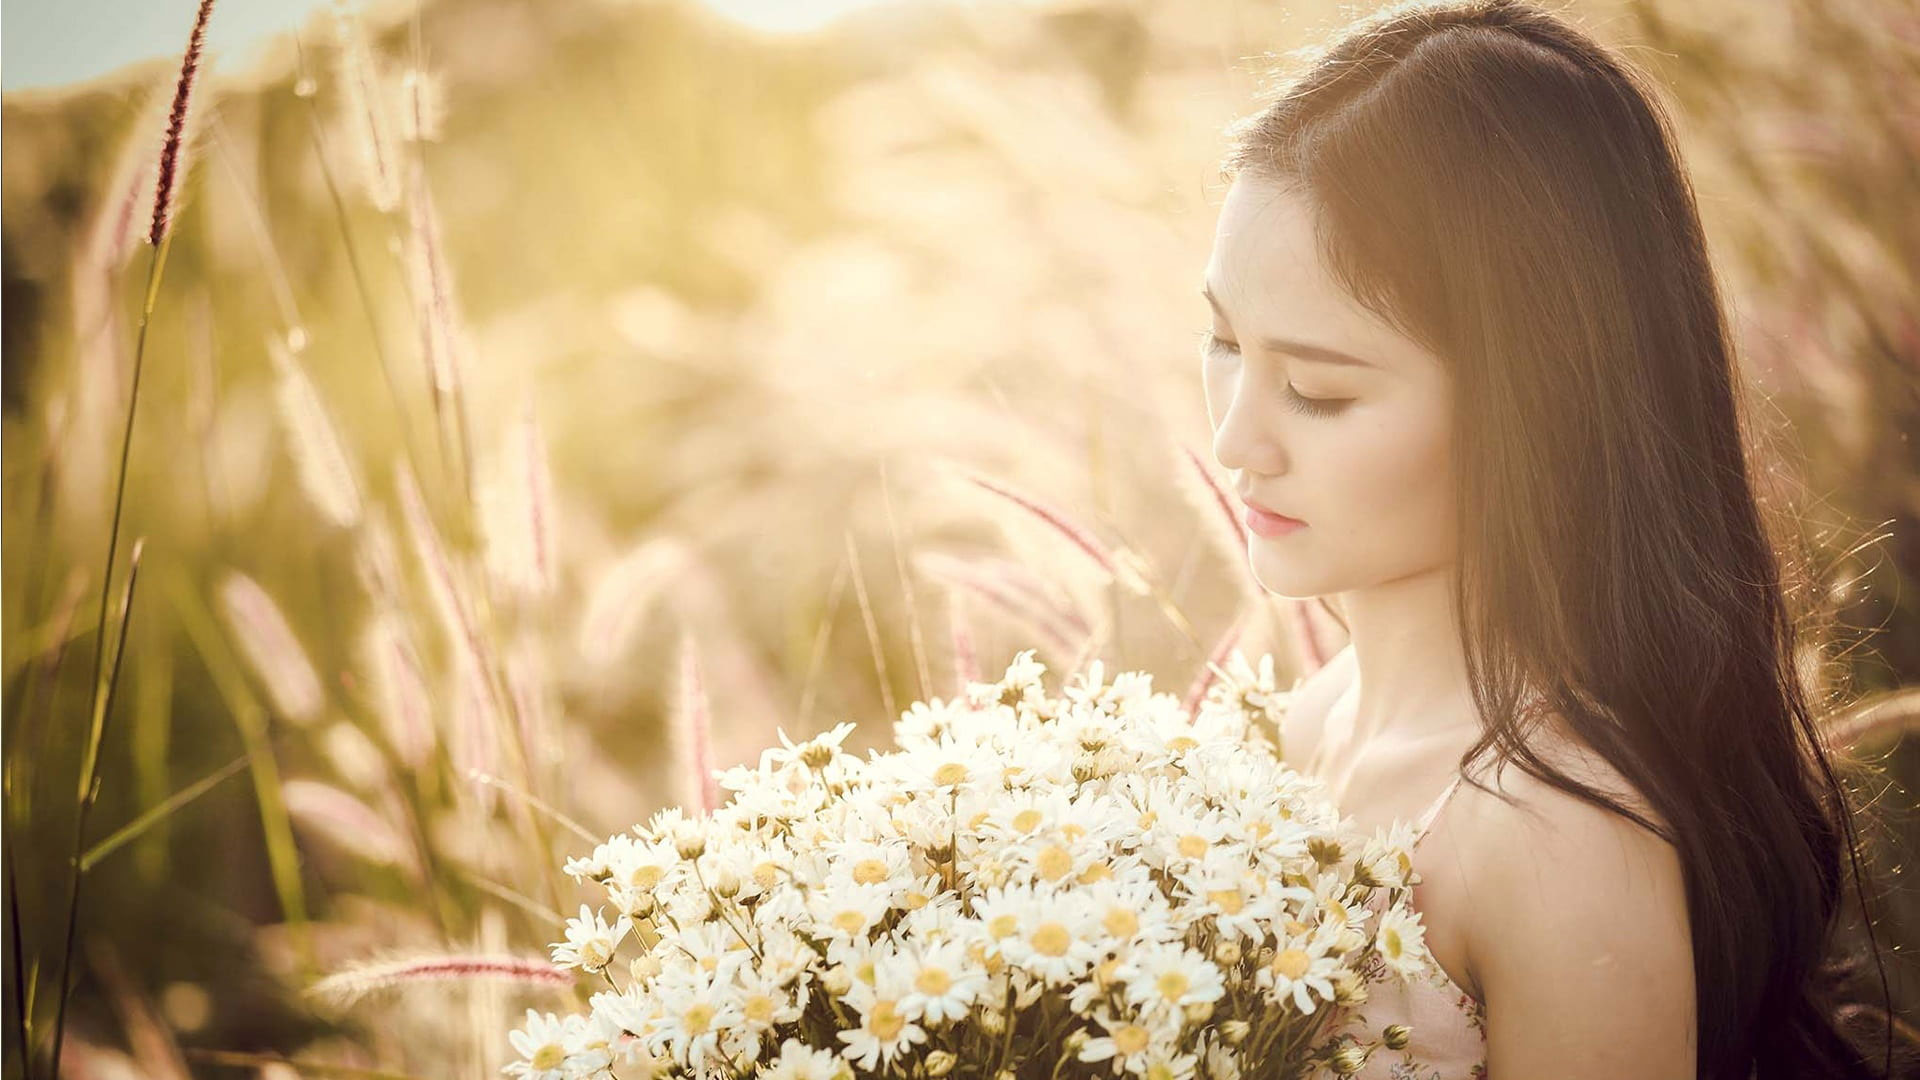 Woman holding white daisies wallpaper, asia, beauty, nice picture, girly, Asia, Empty